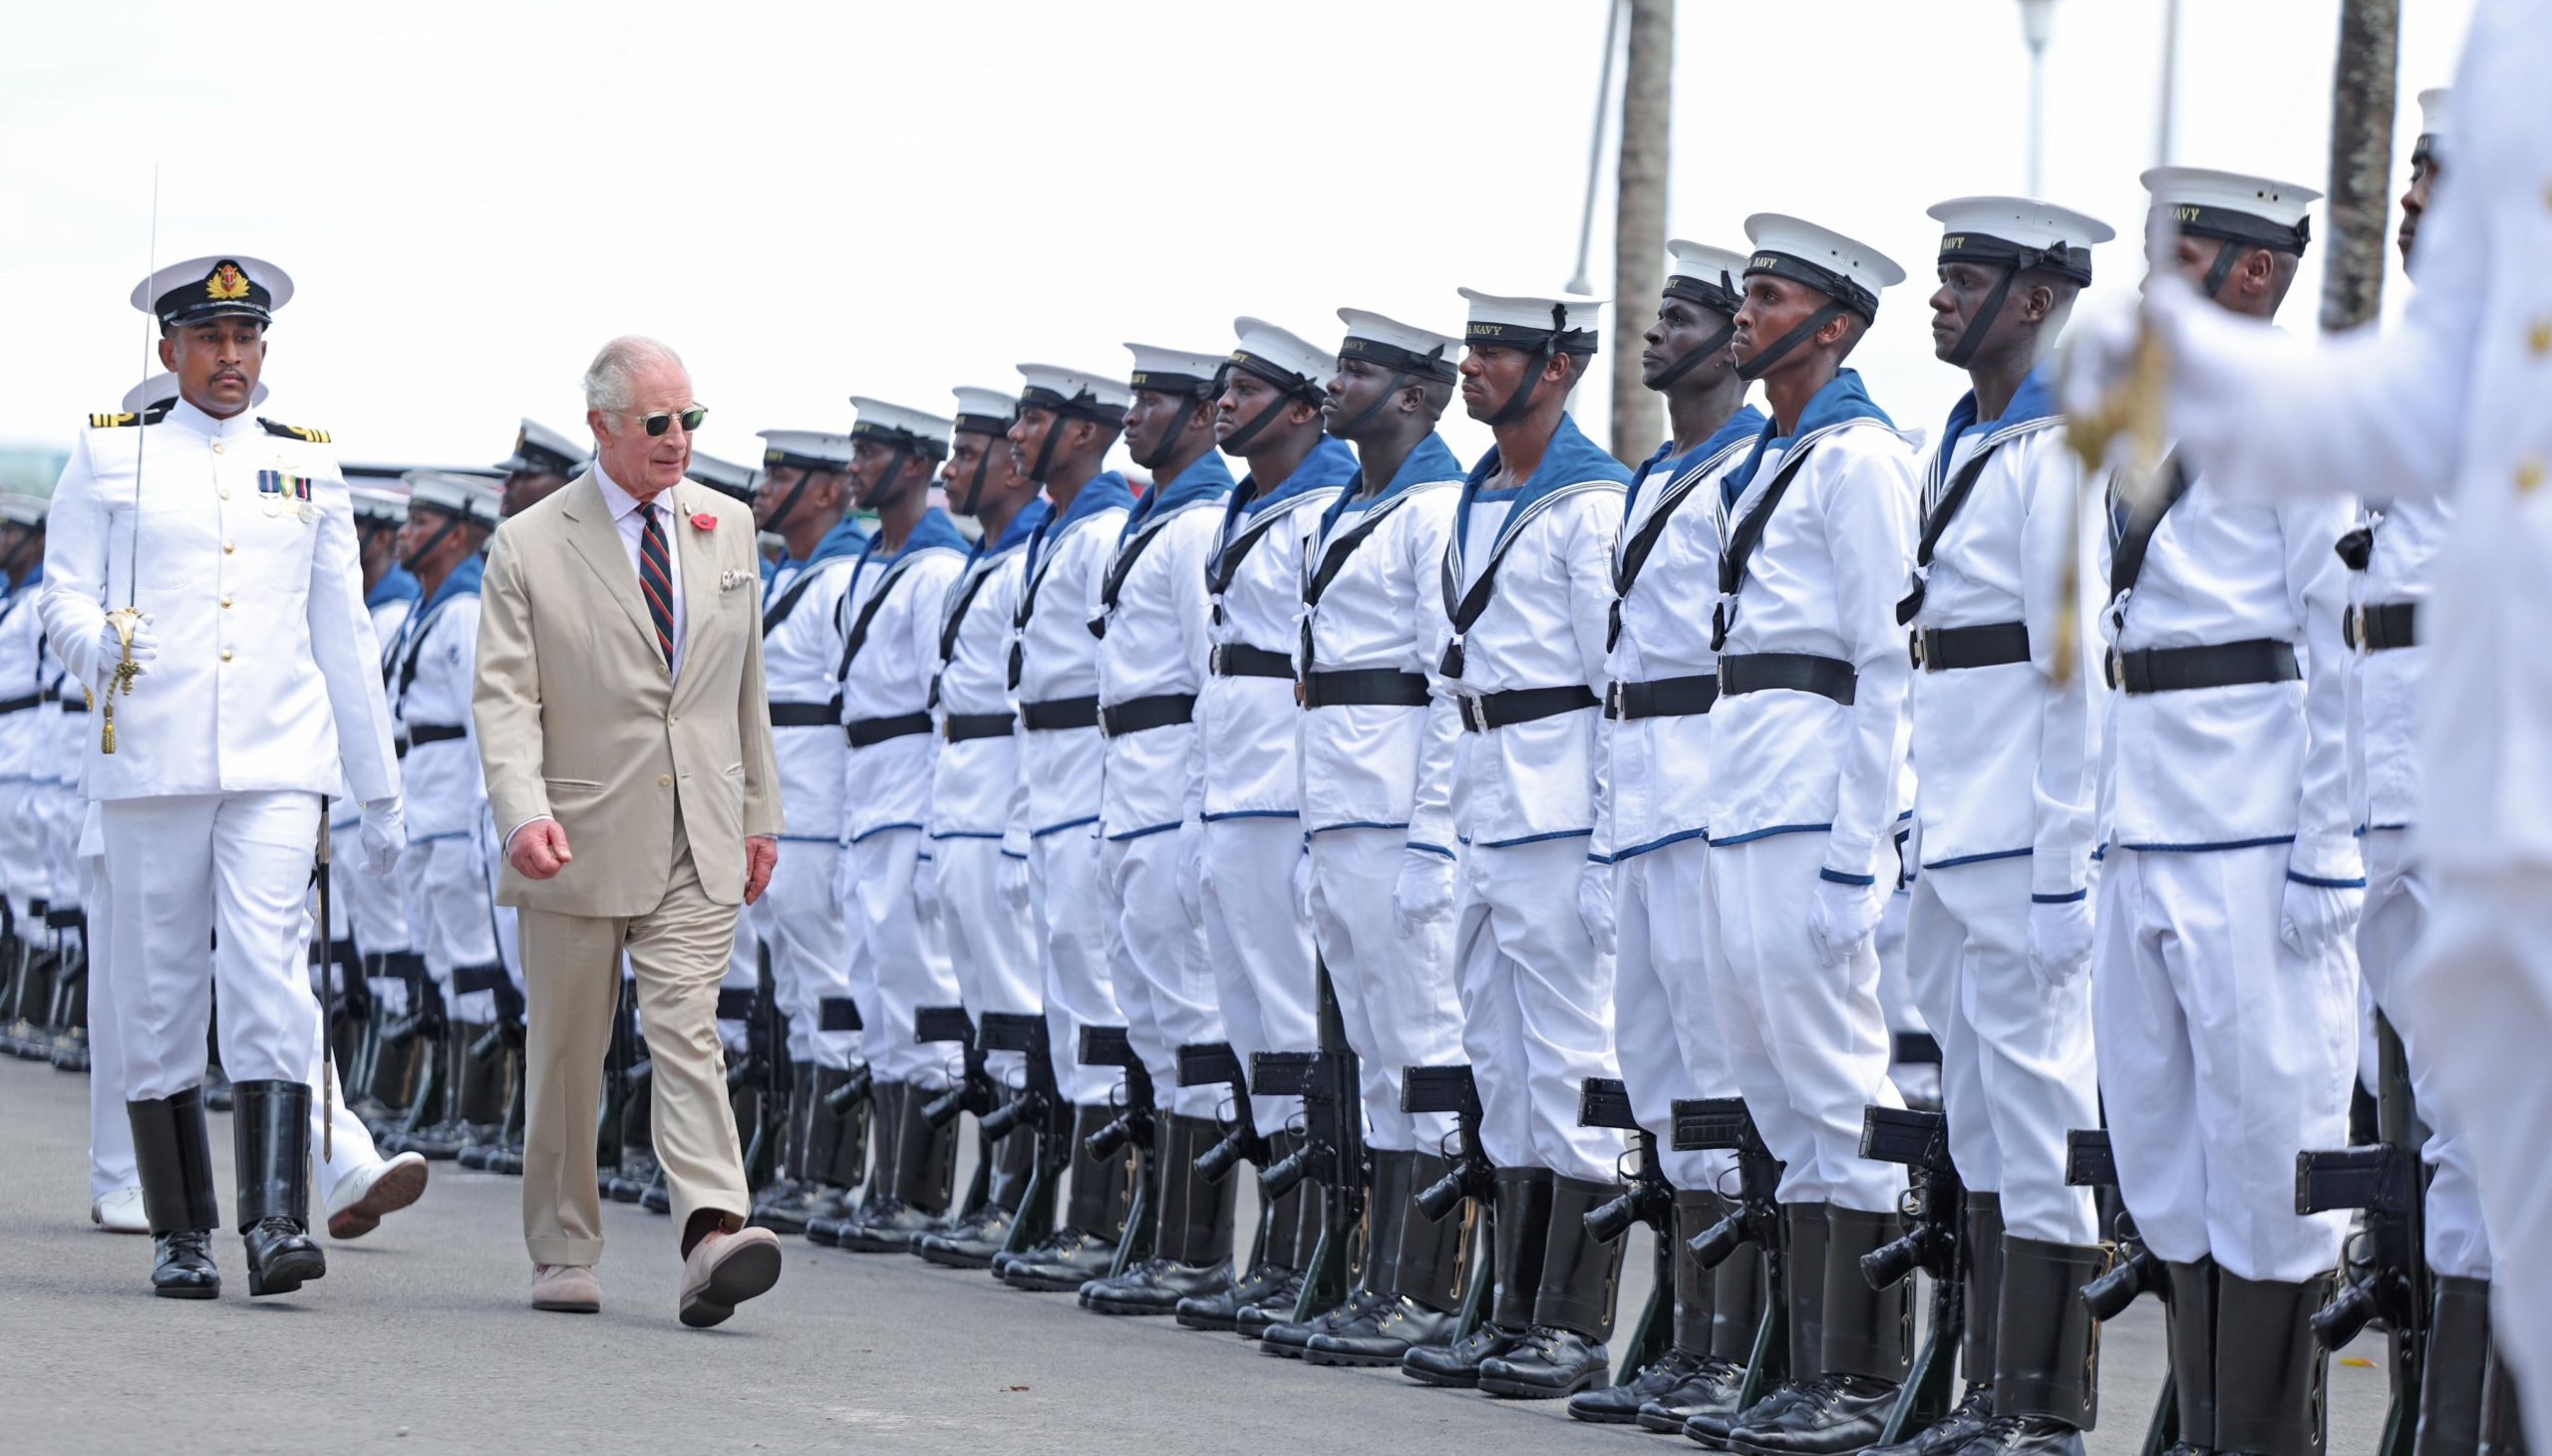 Royal Marines and Kenyan Forces Collaborate to Enhance Security Against Terrorism